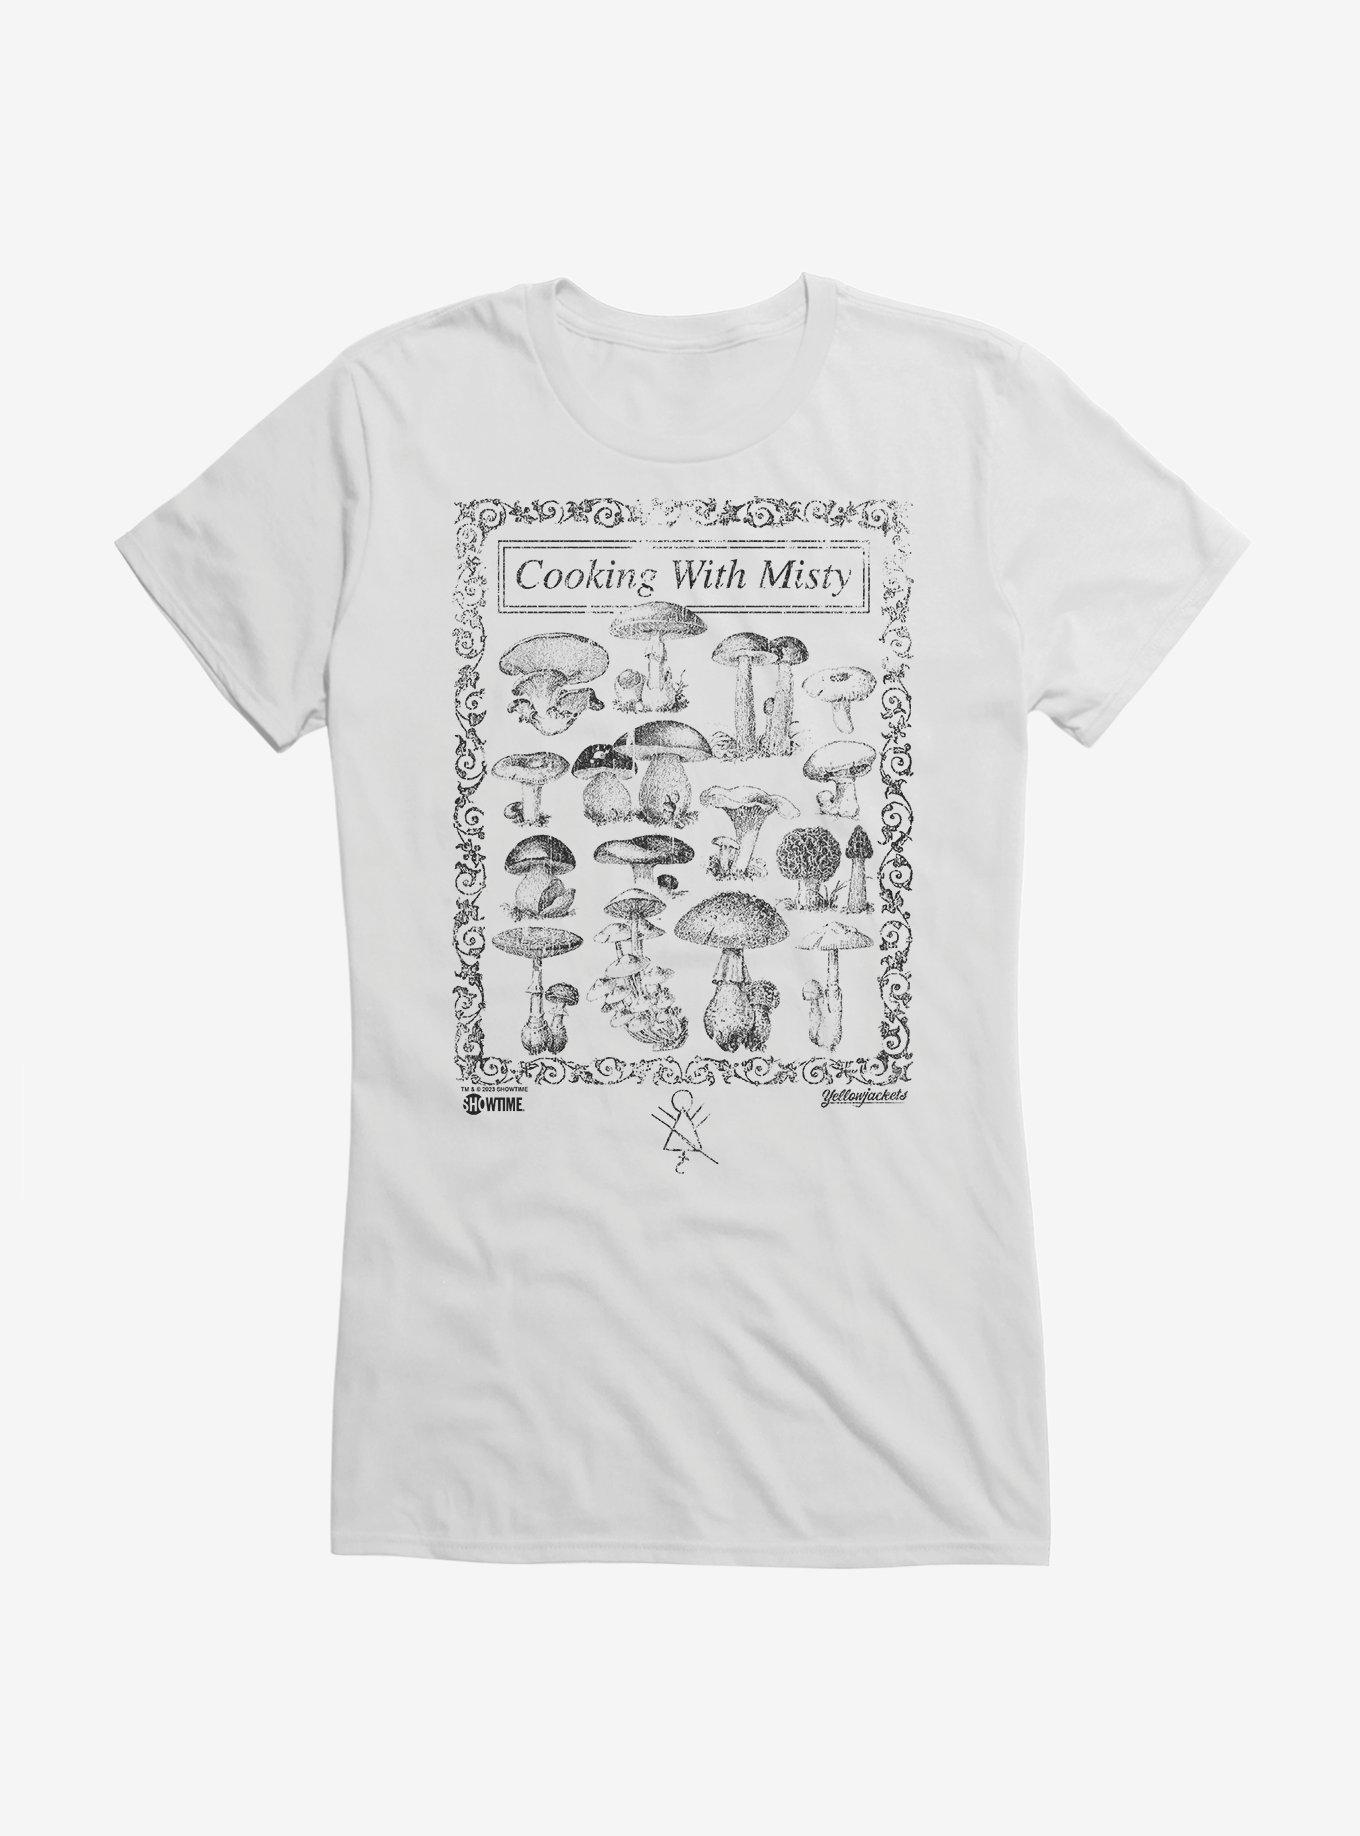 Yellowjackets Cooking With Misty Mushroom Girls T-Shirt, WHITE, hi-res